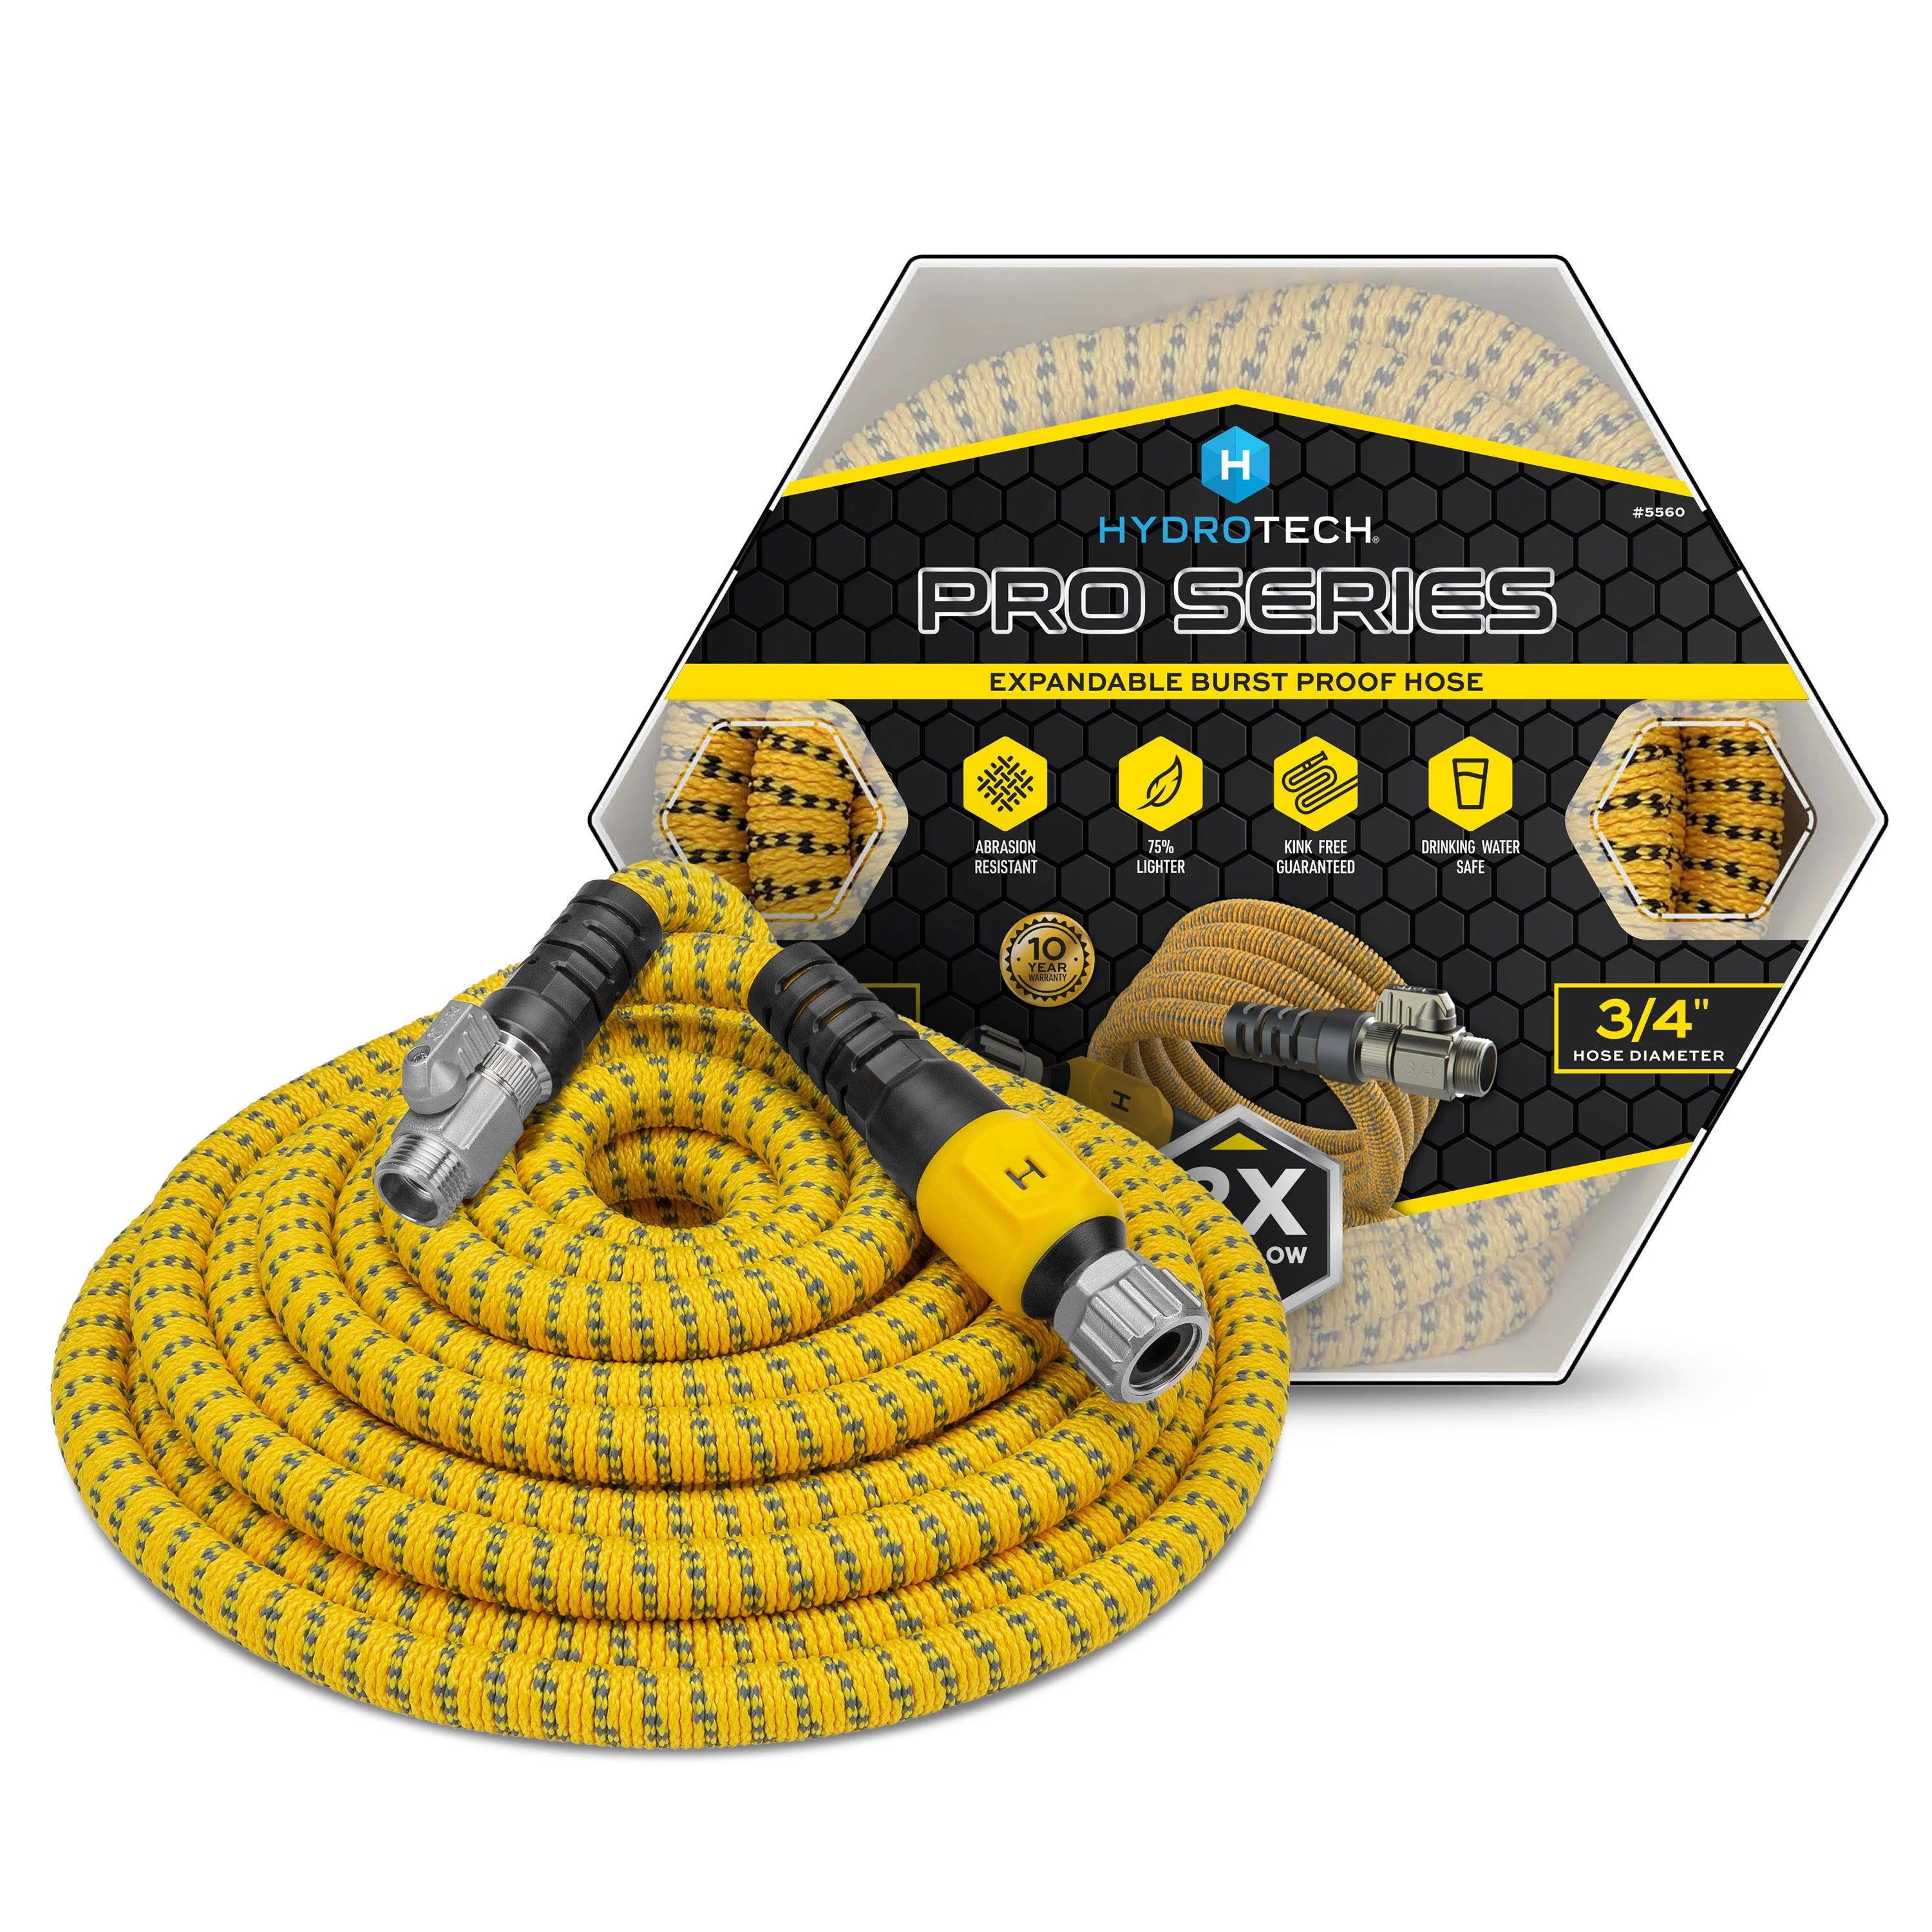 Hydrotech 3/4 in. Expandable Burst Proof Hose - 100 ft. in Yellow | Image